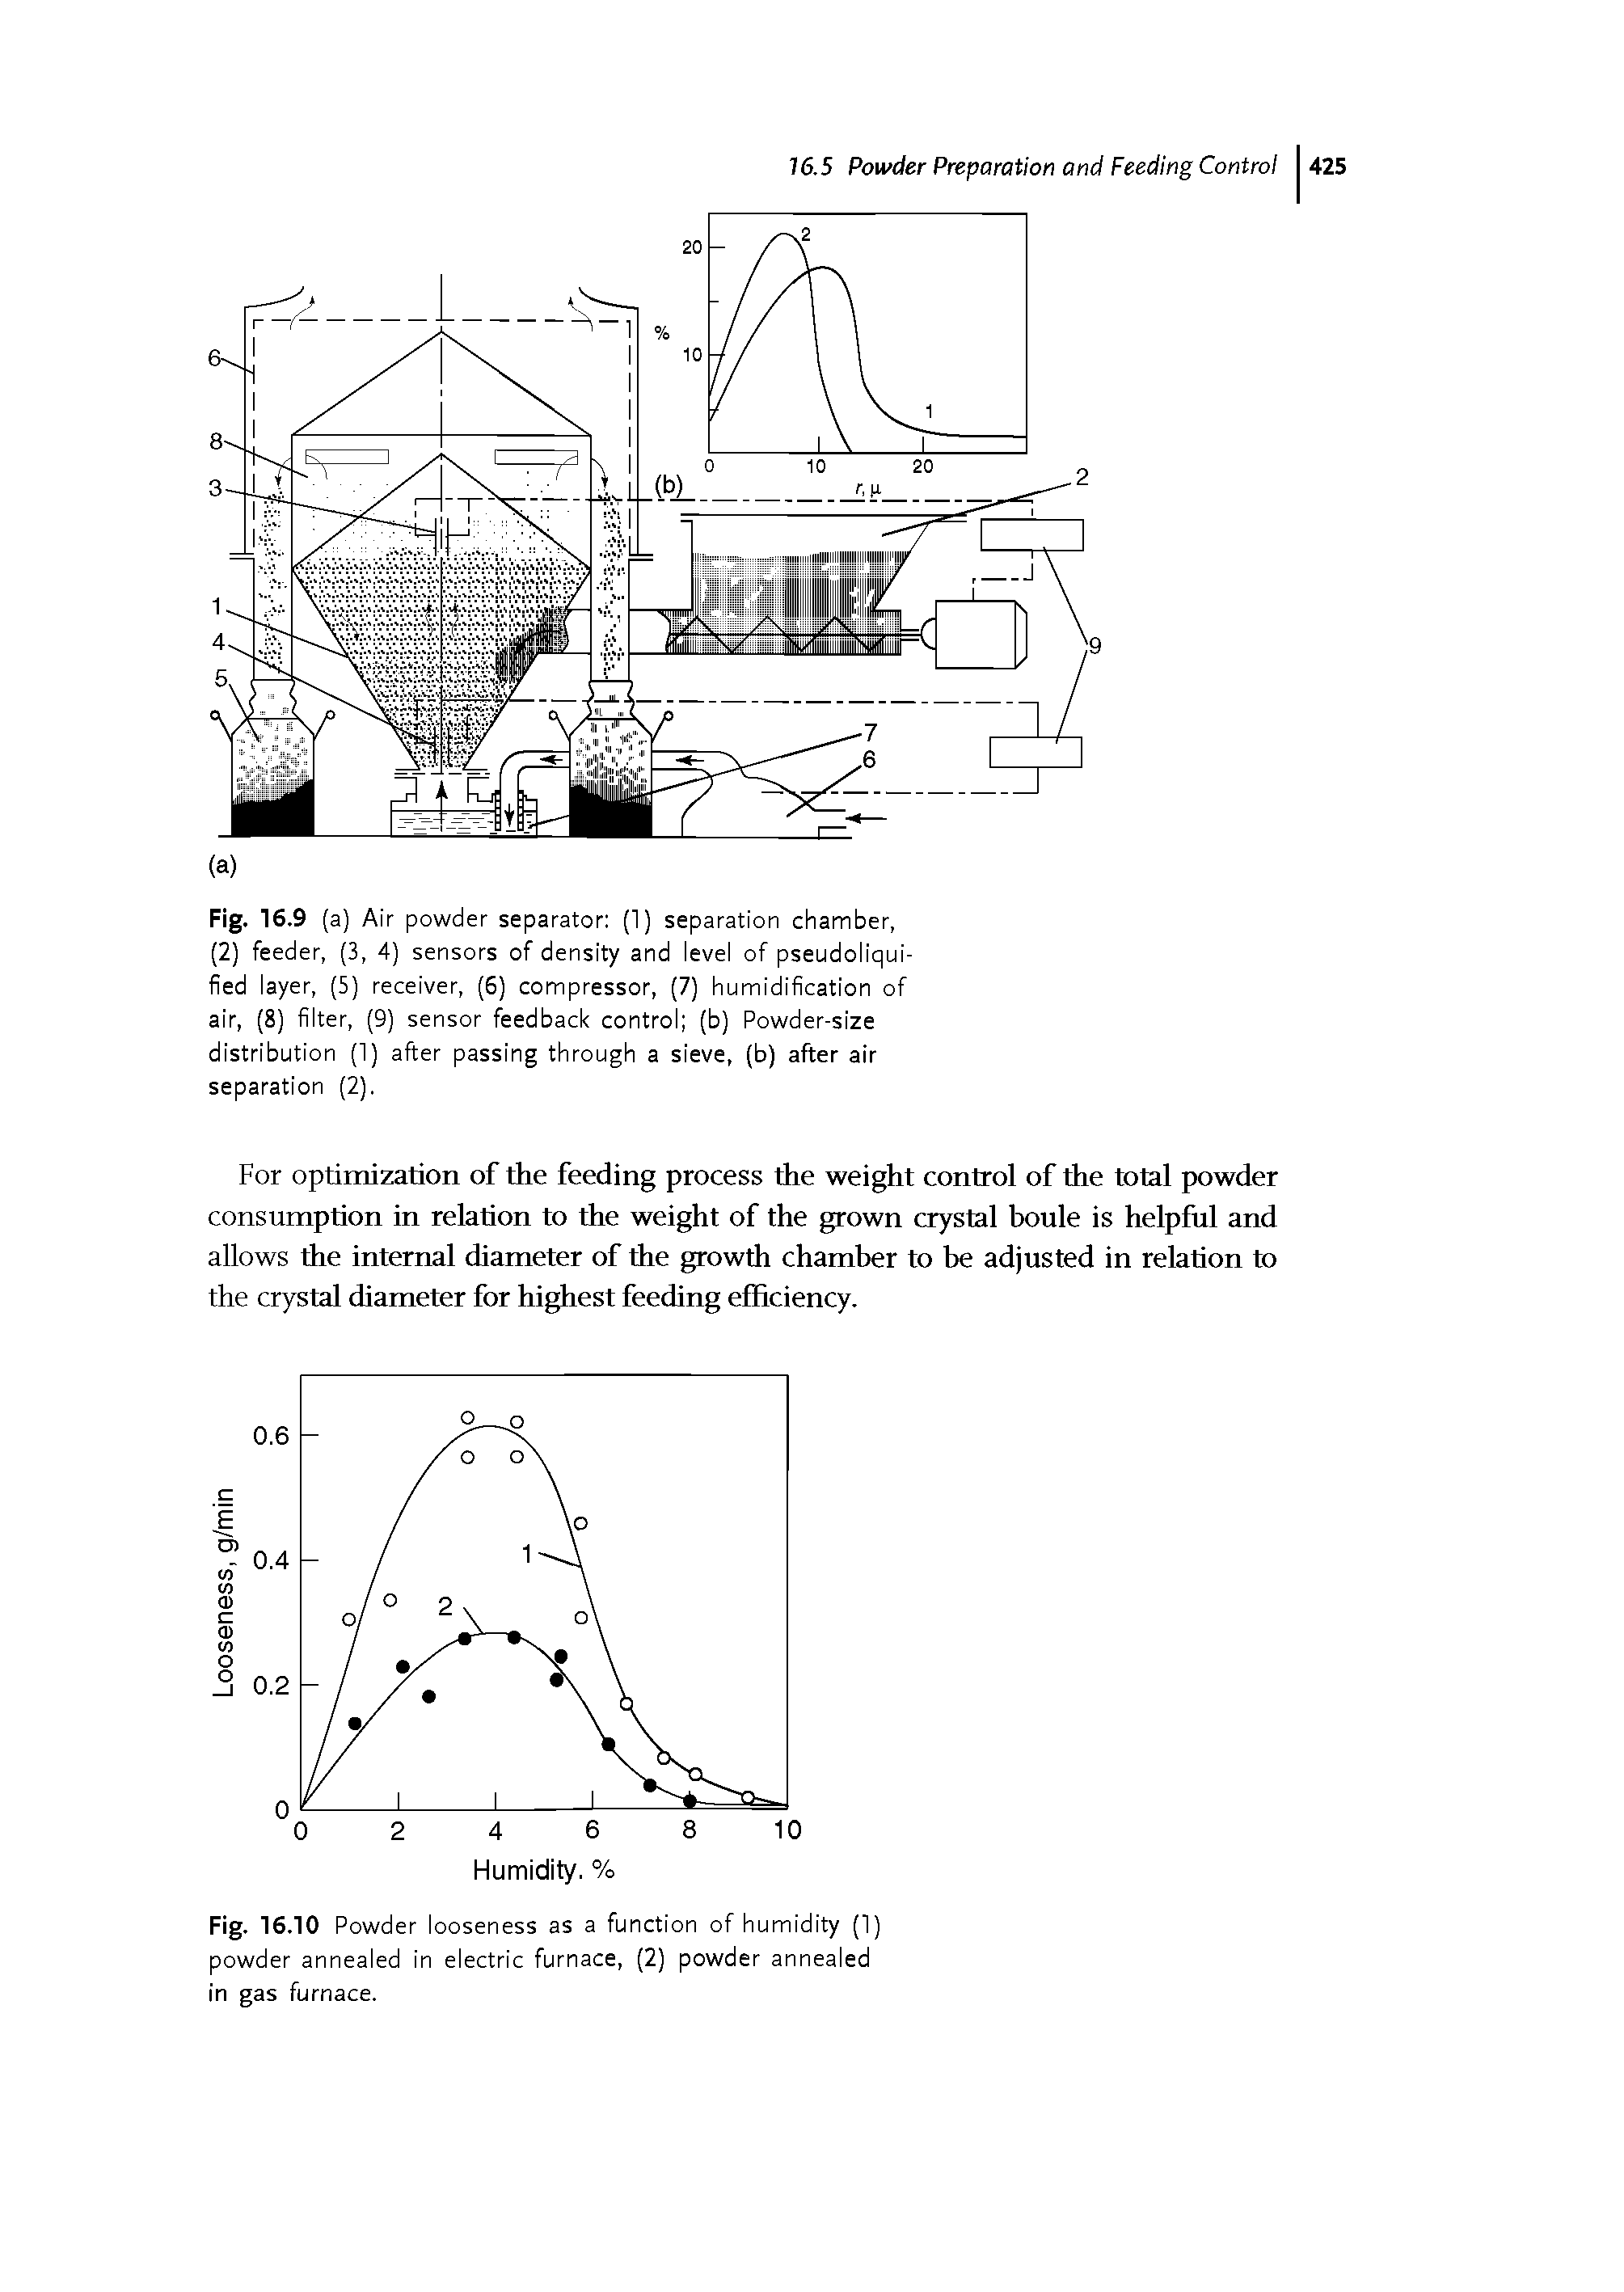 Fig. 16.10 Powder looseness as a function of humidity (1) powder annealed in electric furnace, (2) powder annealed in gas furnace.